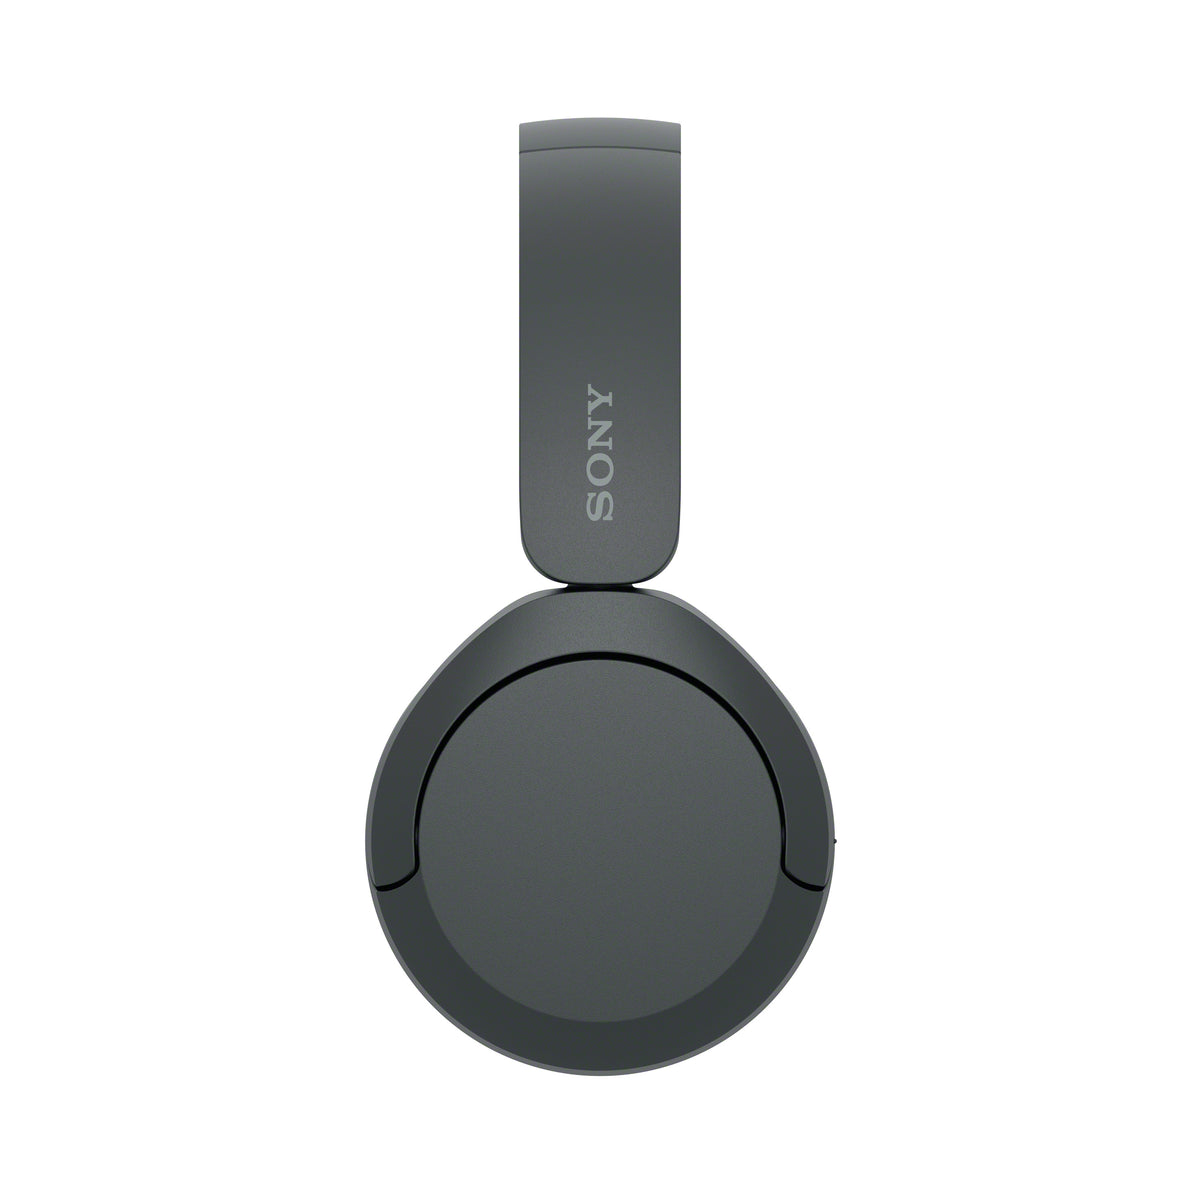 Sony Over-Ear Wireless Bluetooth Headphone - Black | WHCH520BCE7 from Sony - DID Electrical